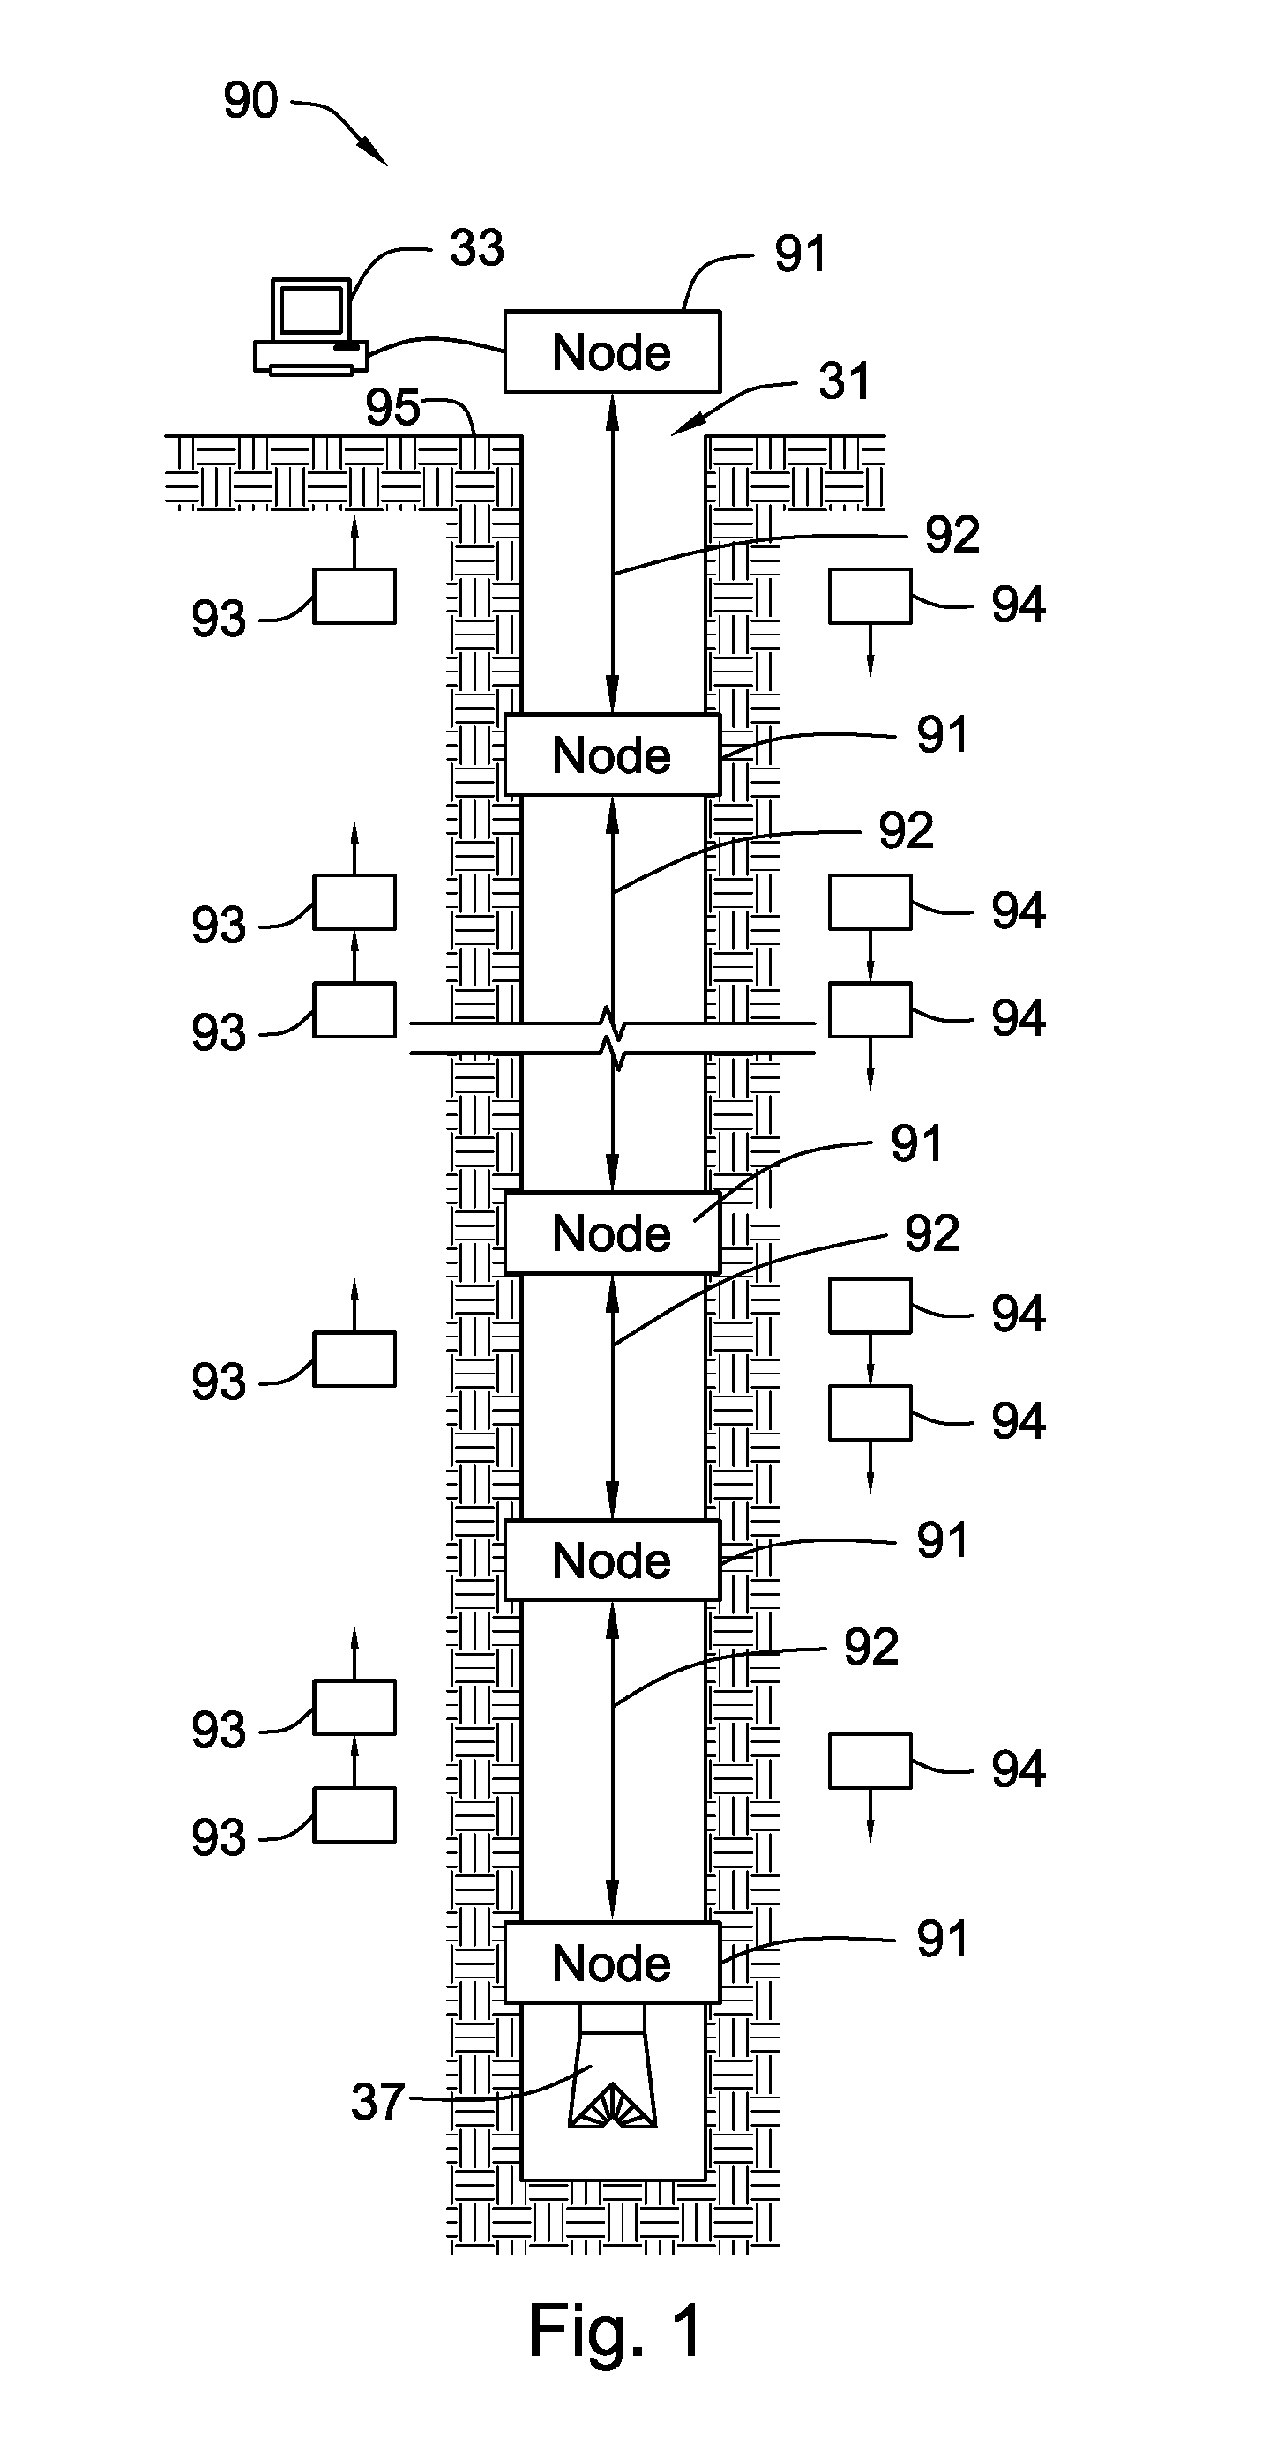 System for Adjusting Frequency of Electrical Output Pulses Derived from an Oscillator